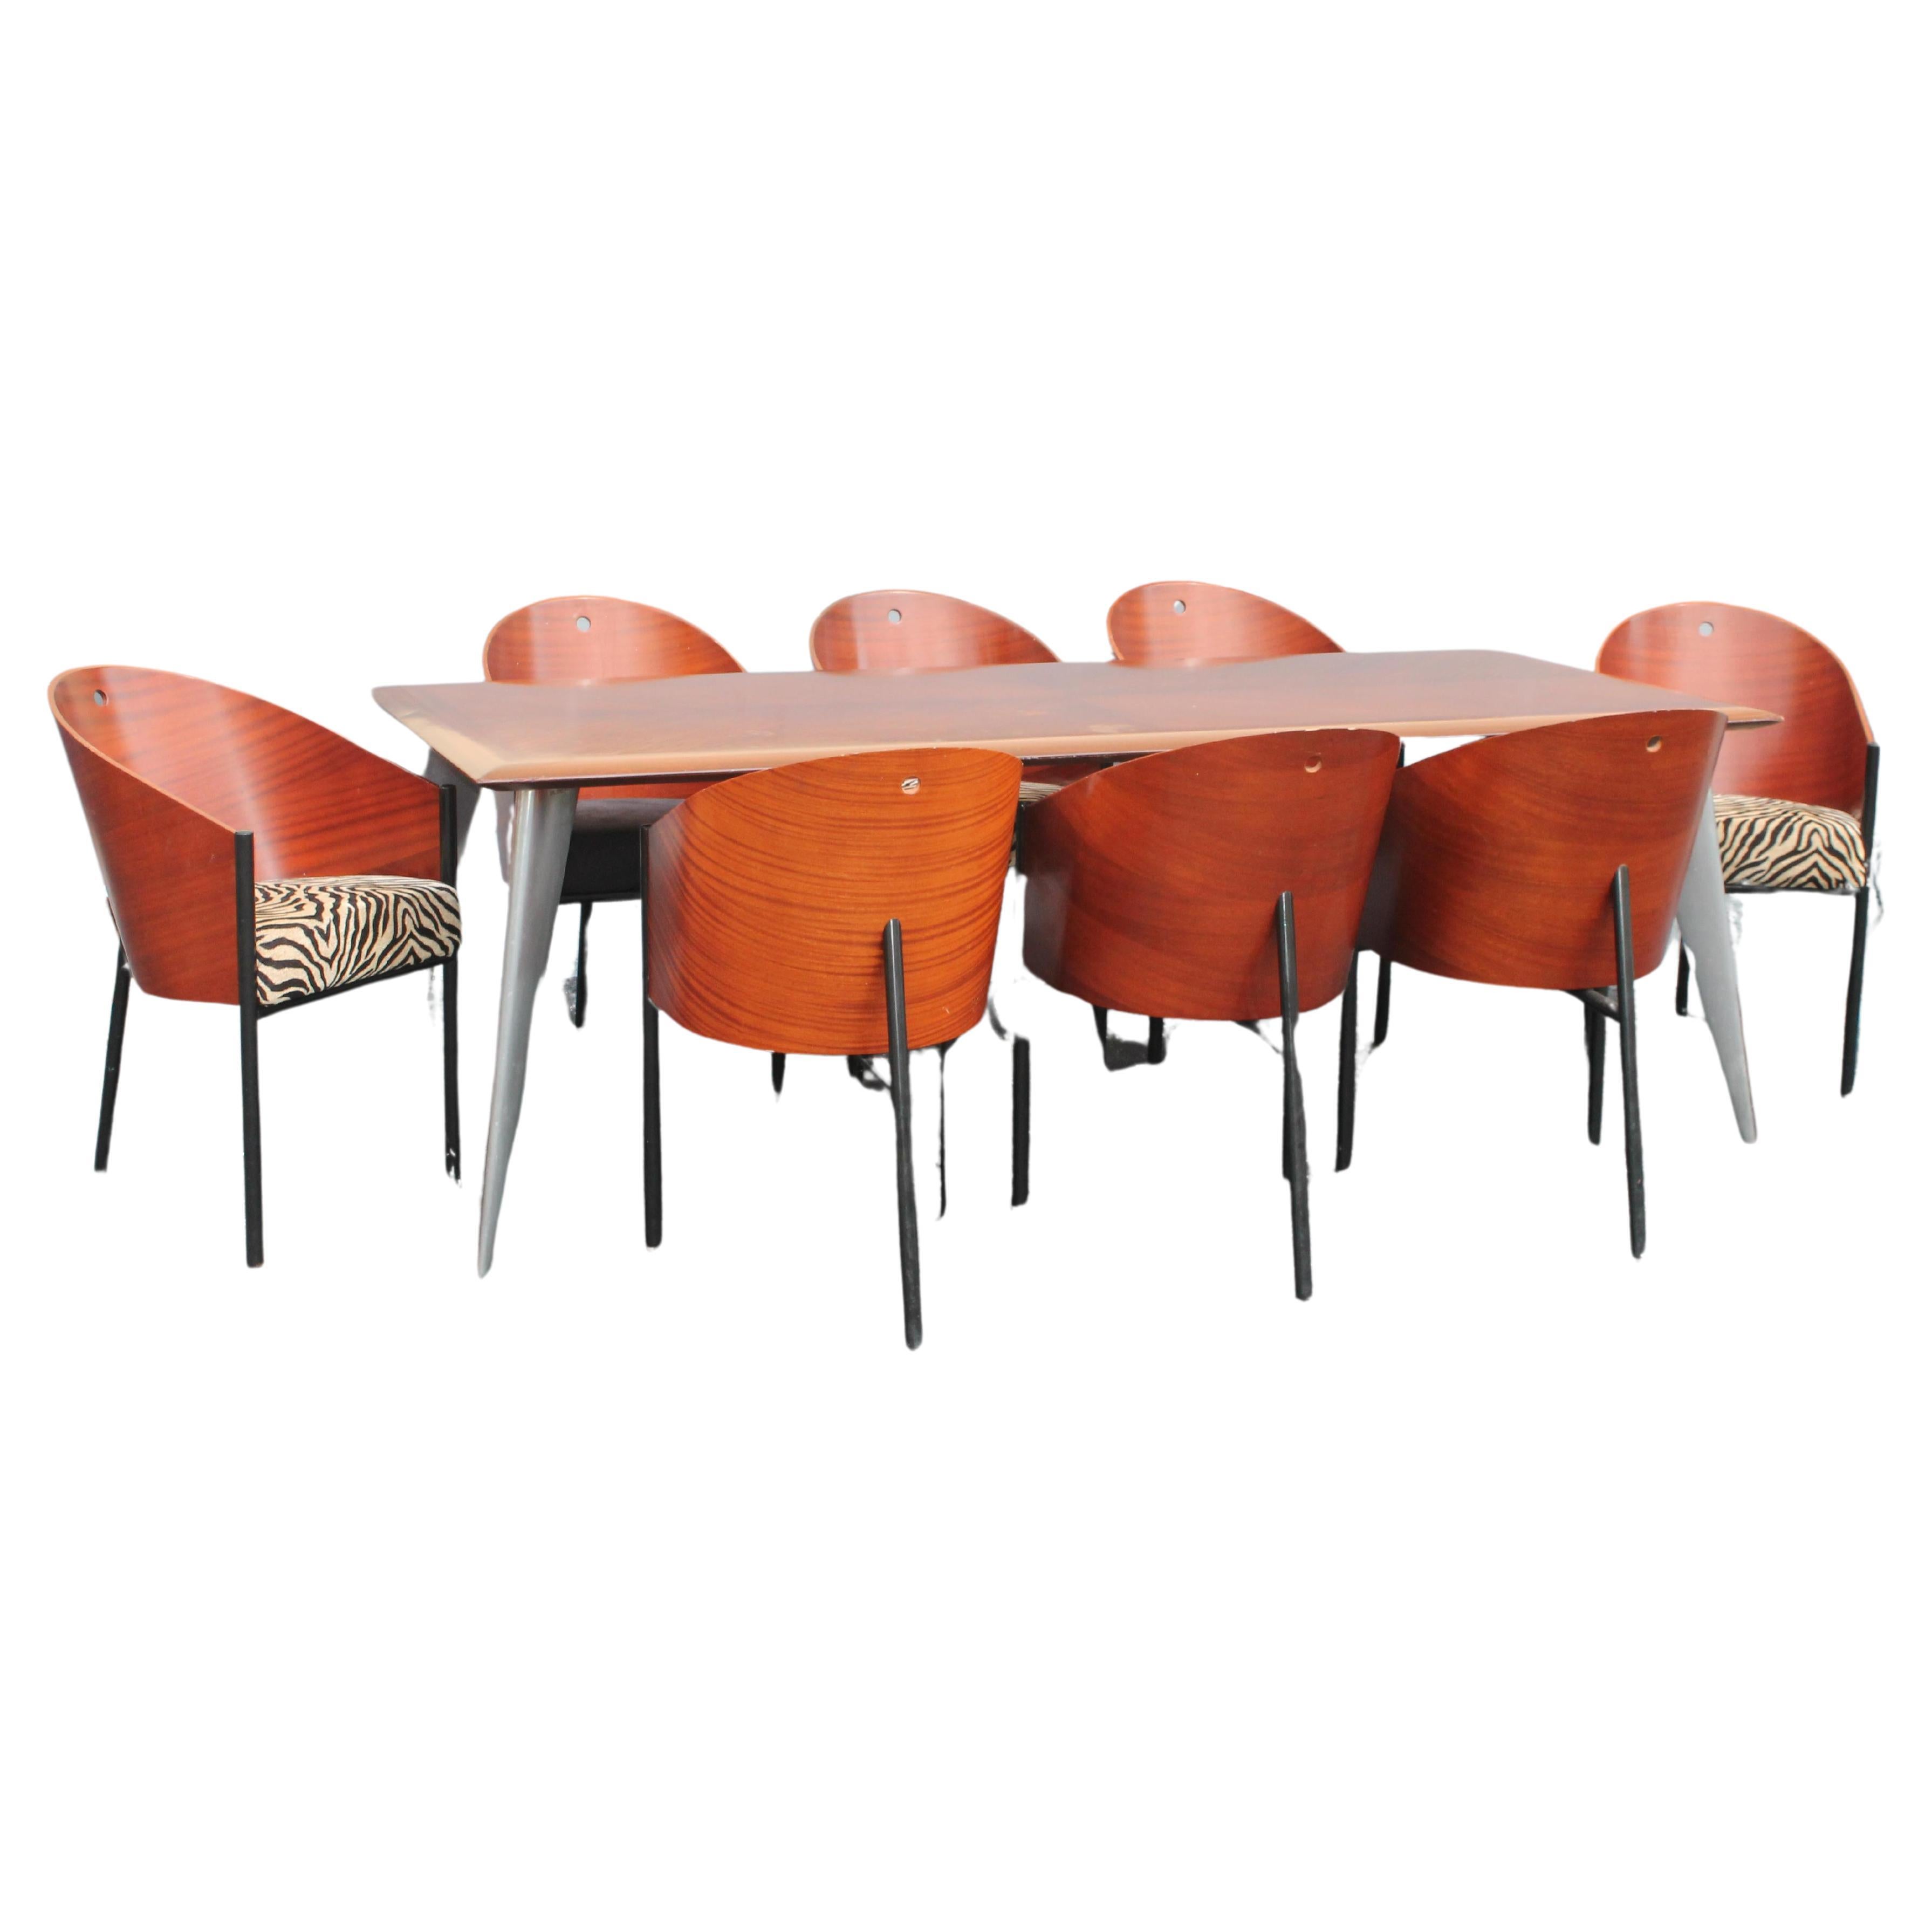 '80s Art Deco 9 Piece Dining Set Signed by Philippe Starck 8 Chairs+Dining Table For Sale